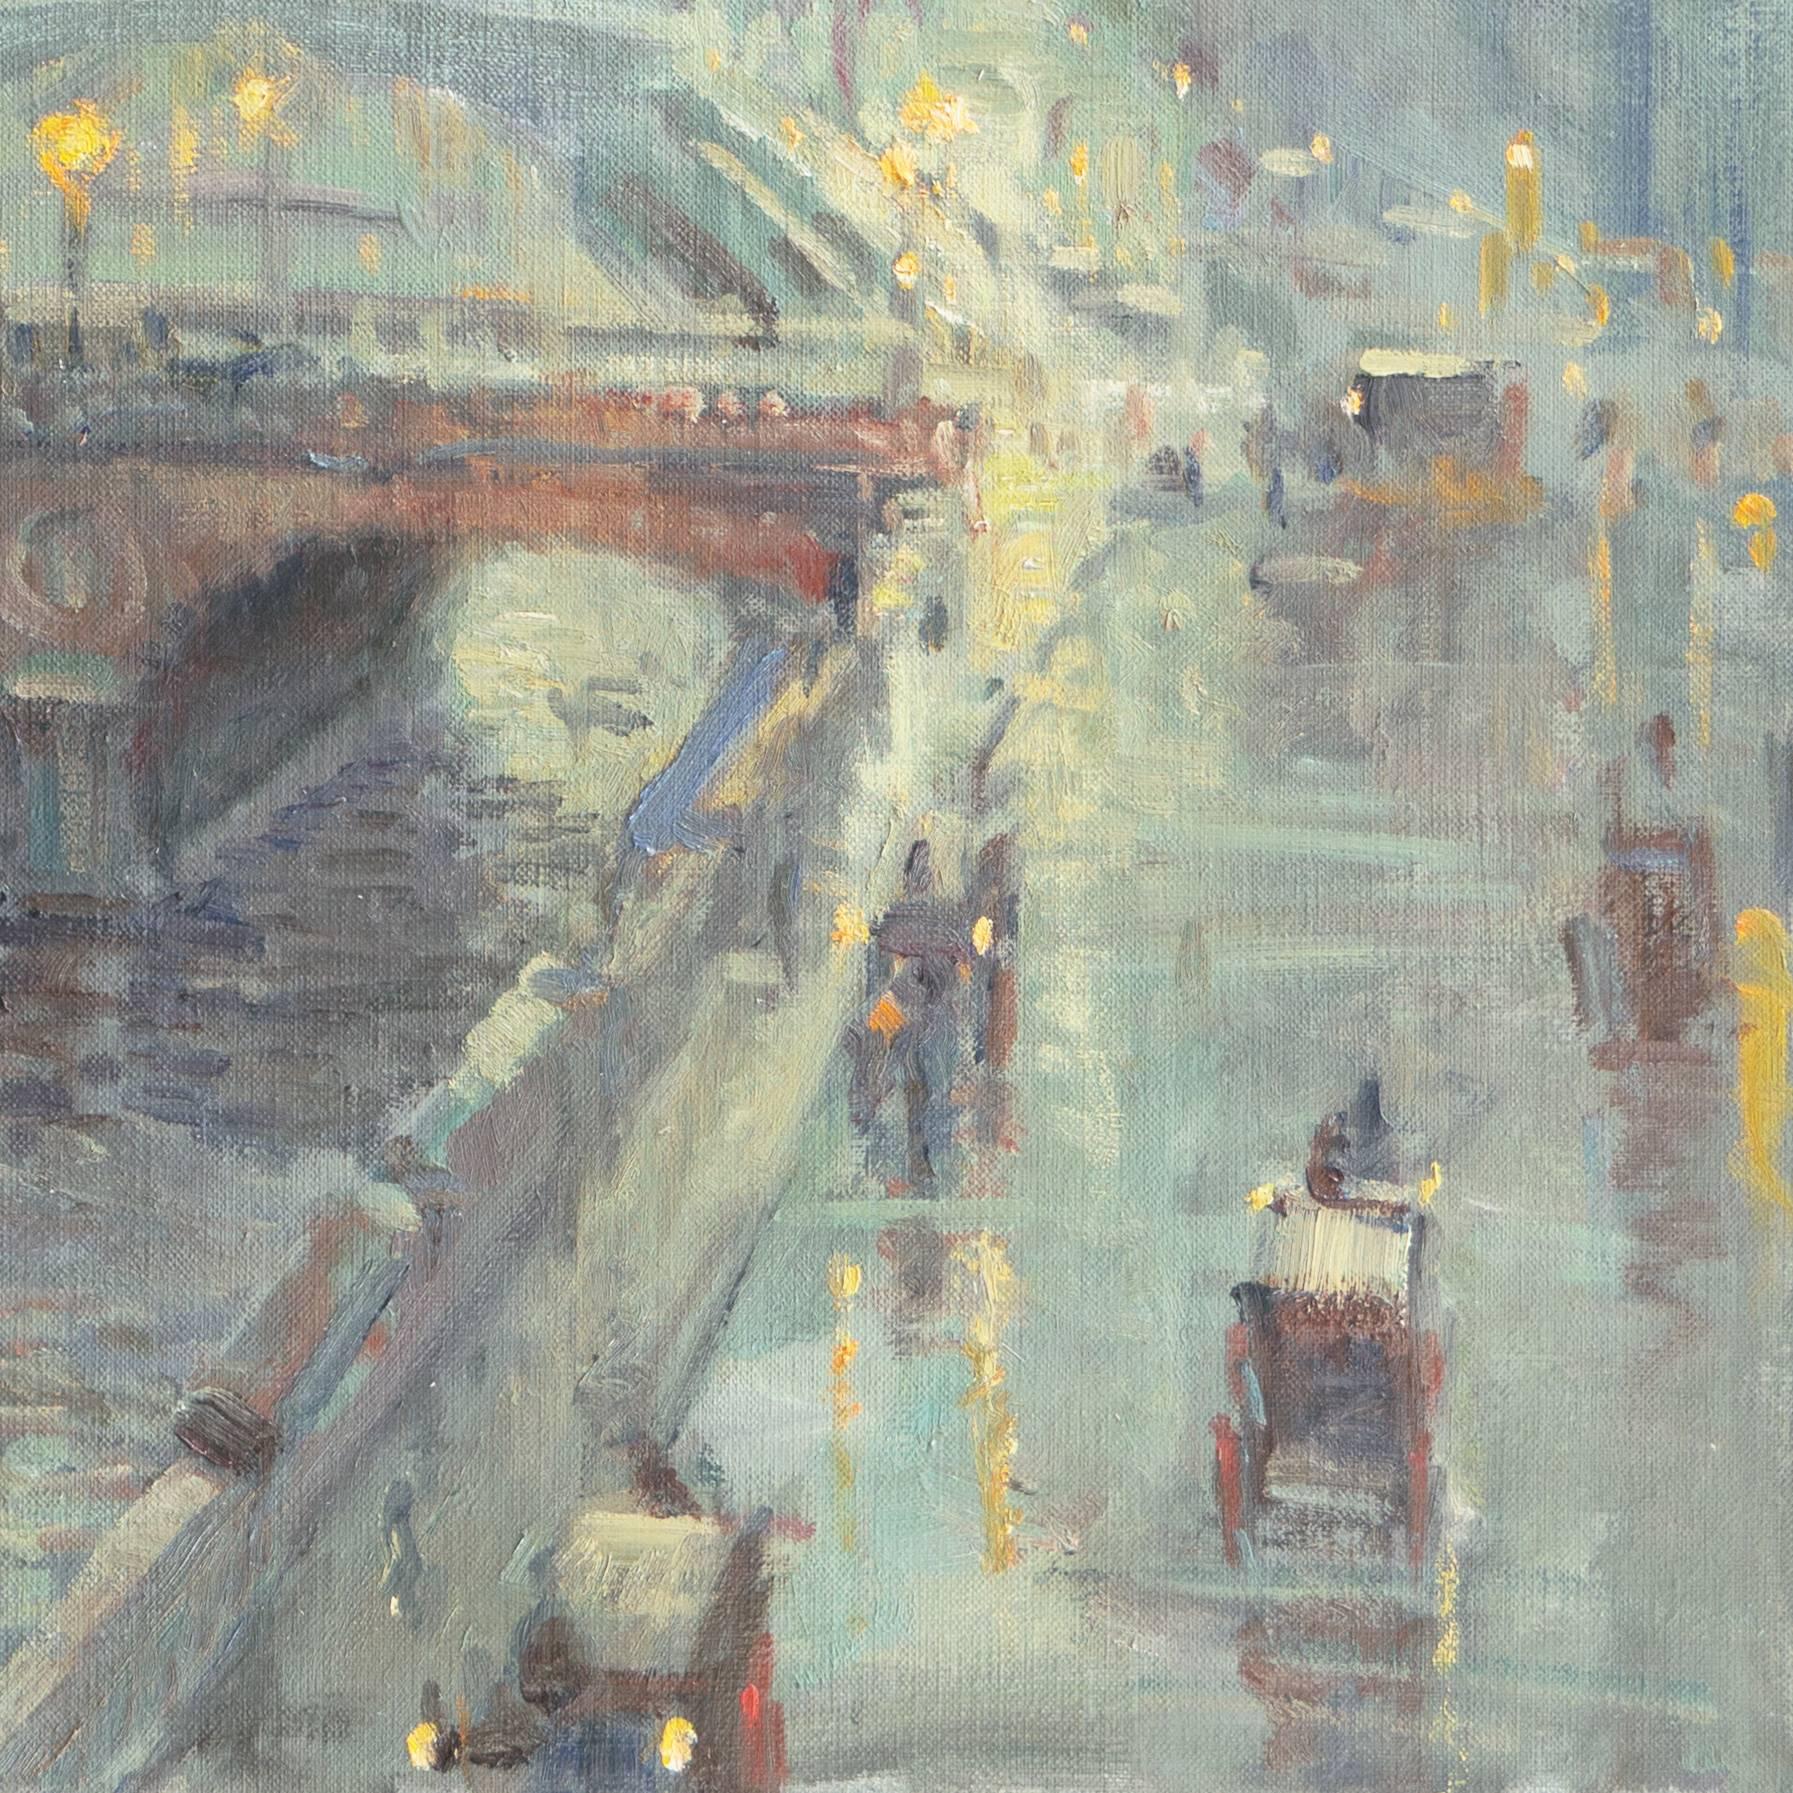 Signed lower left, 'Maley' and stamped on canvas verso '(c) Alan Maley' (British, 1931-1995).

A delicately painted, Impressionist style view of Paris, showing the Seine with the cathedral of Notre Dame and the Île de la Cité,  lit by lamplight on a